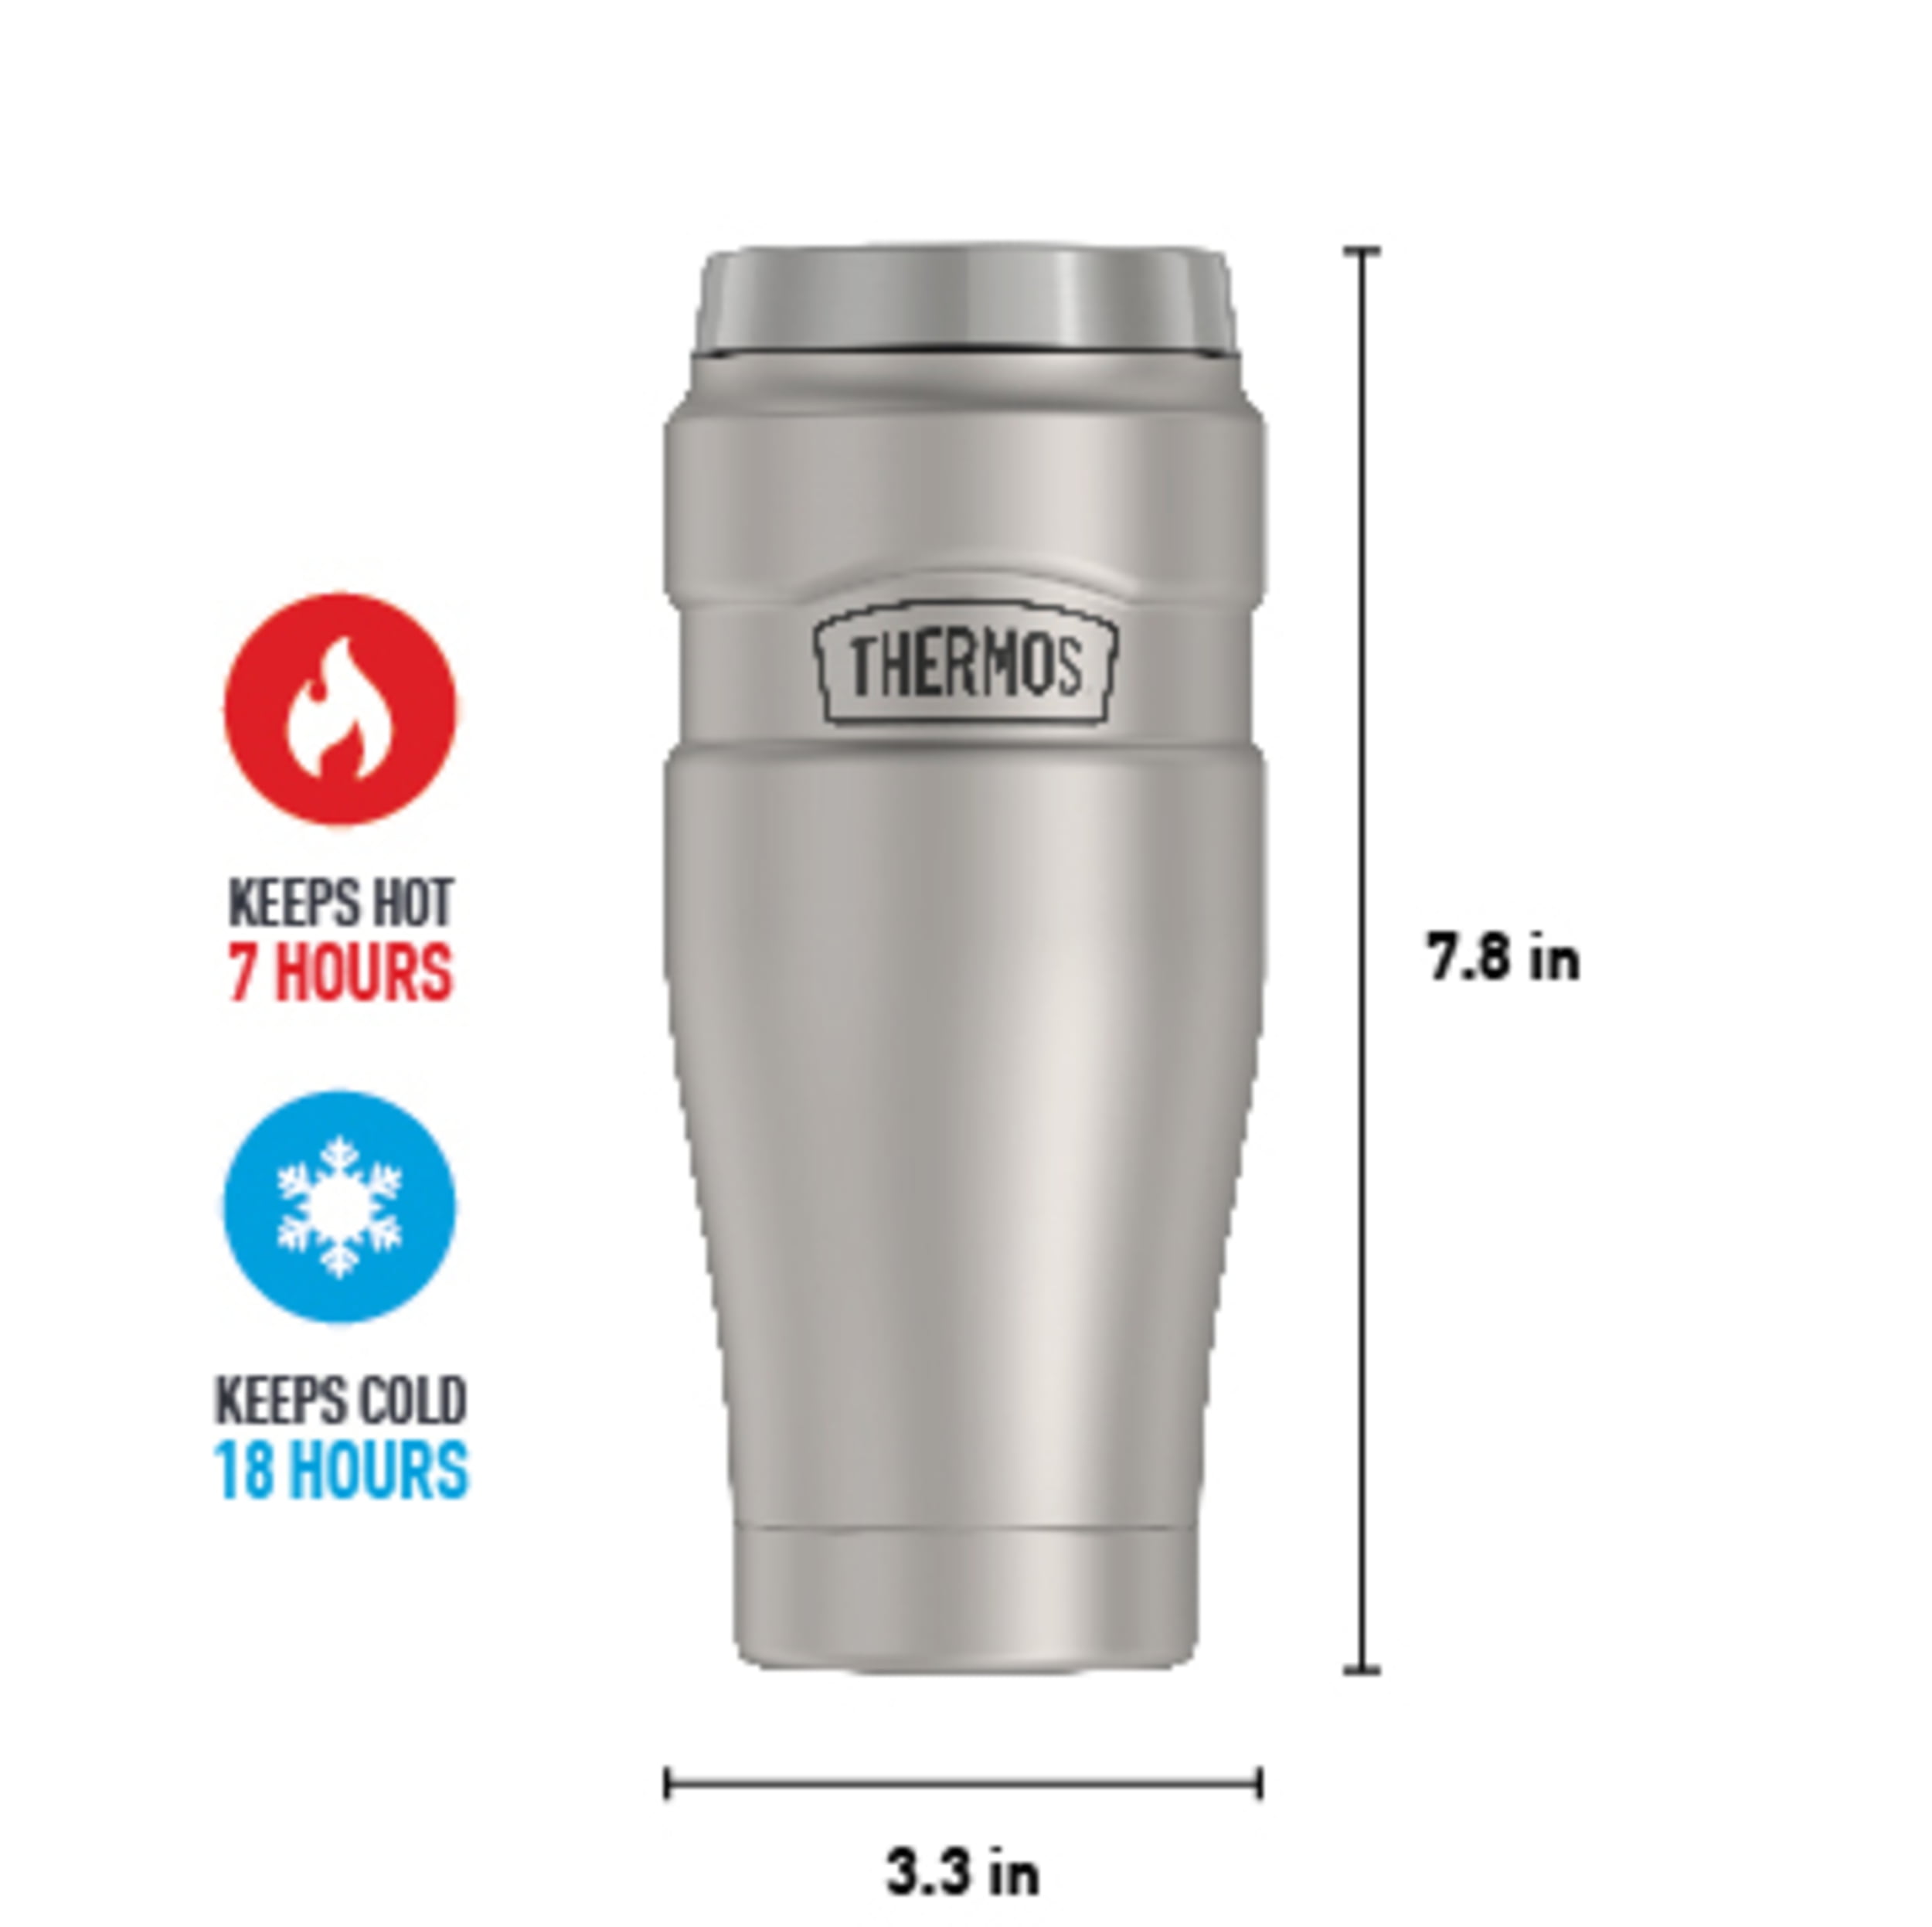  Thermos Stainless King Travel Mug, Red, 470 ml : Home & Kitchen